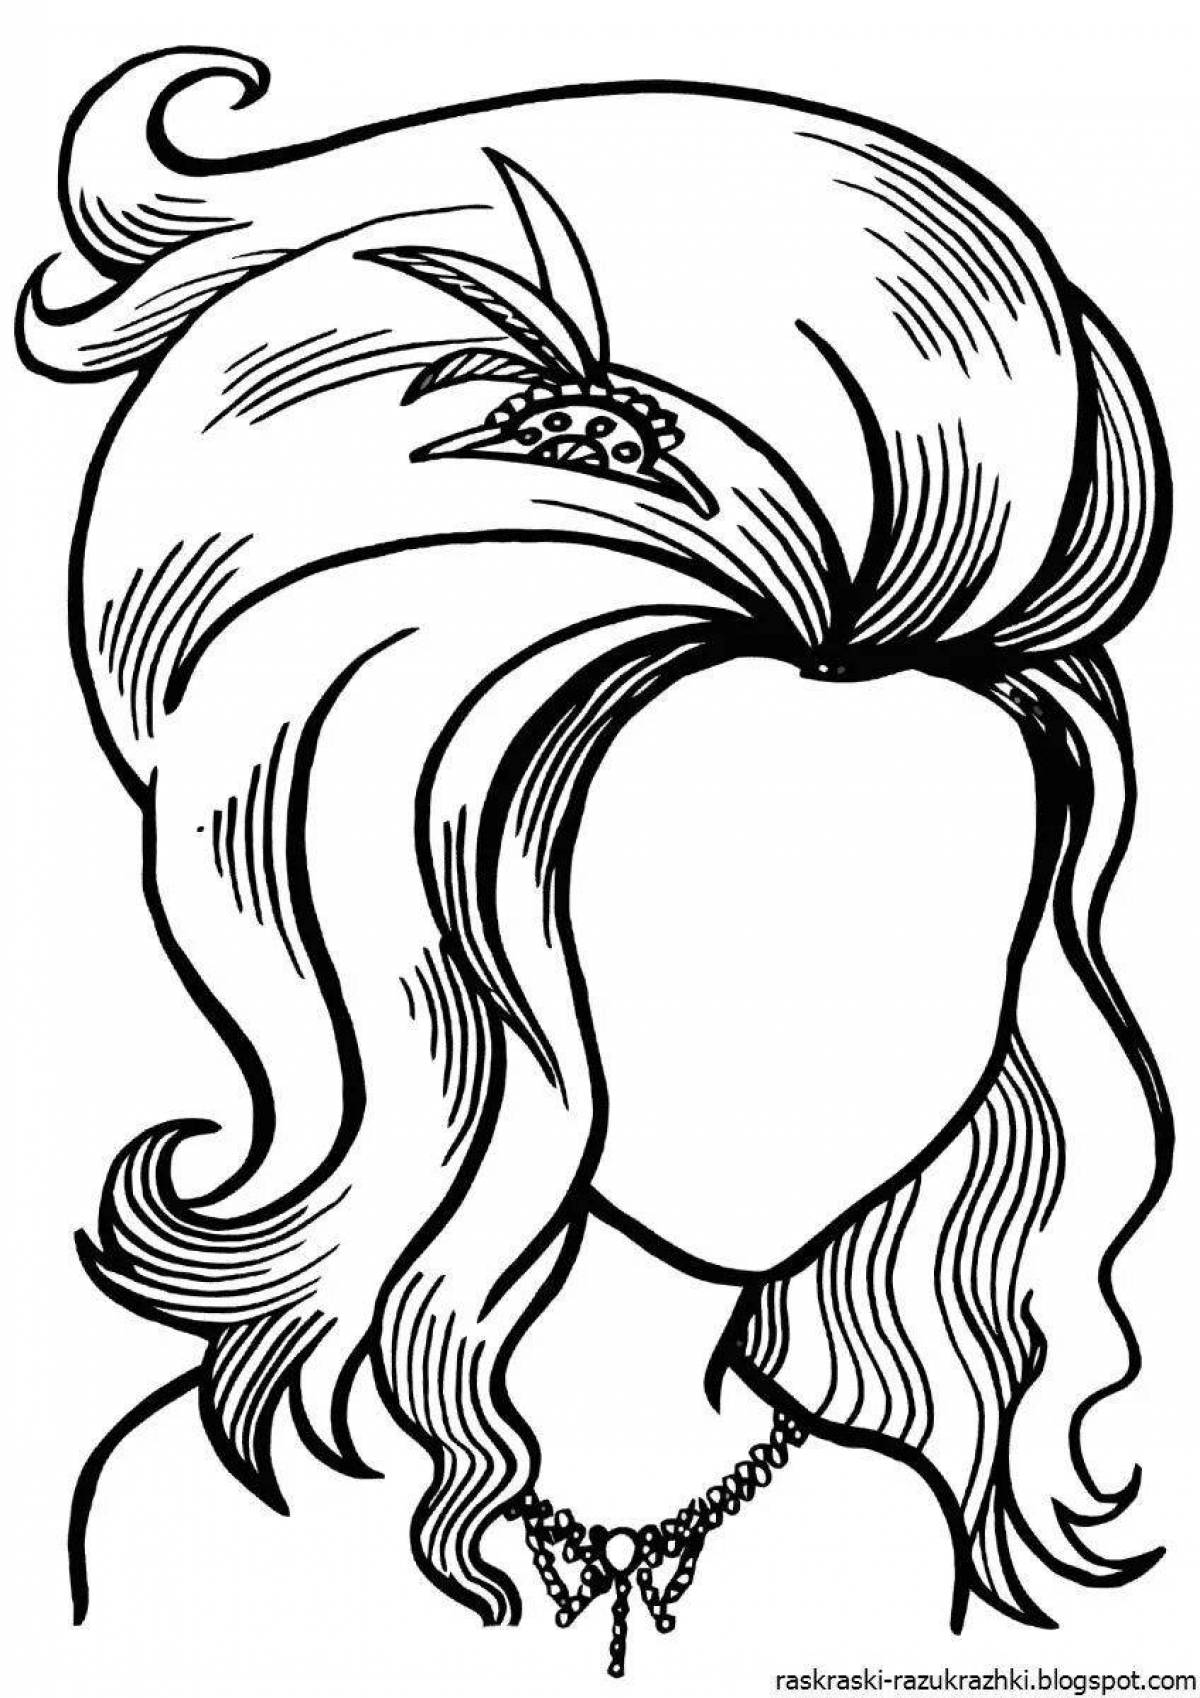 Colorful girl hair coloring page